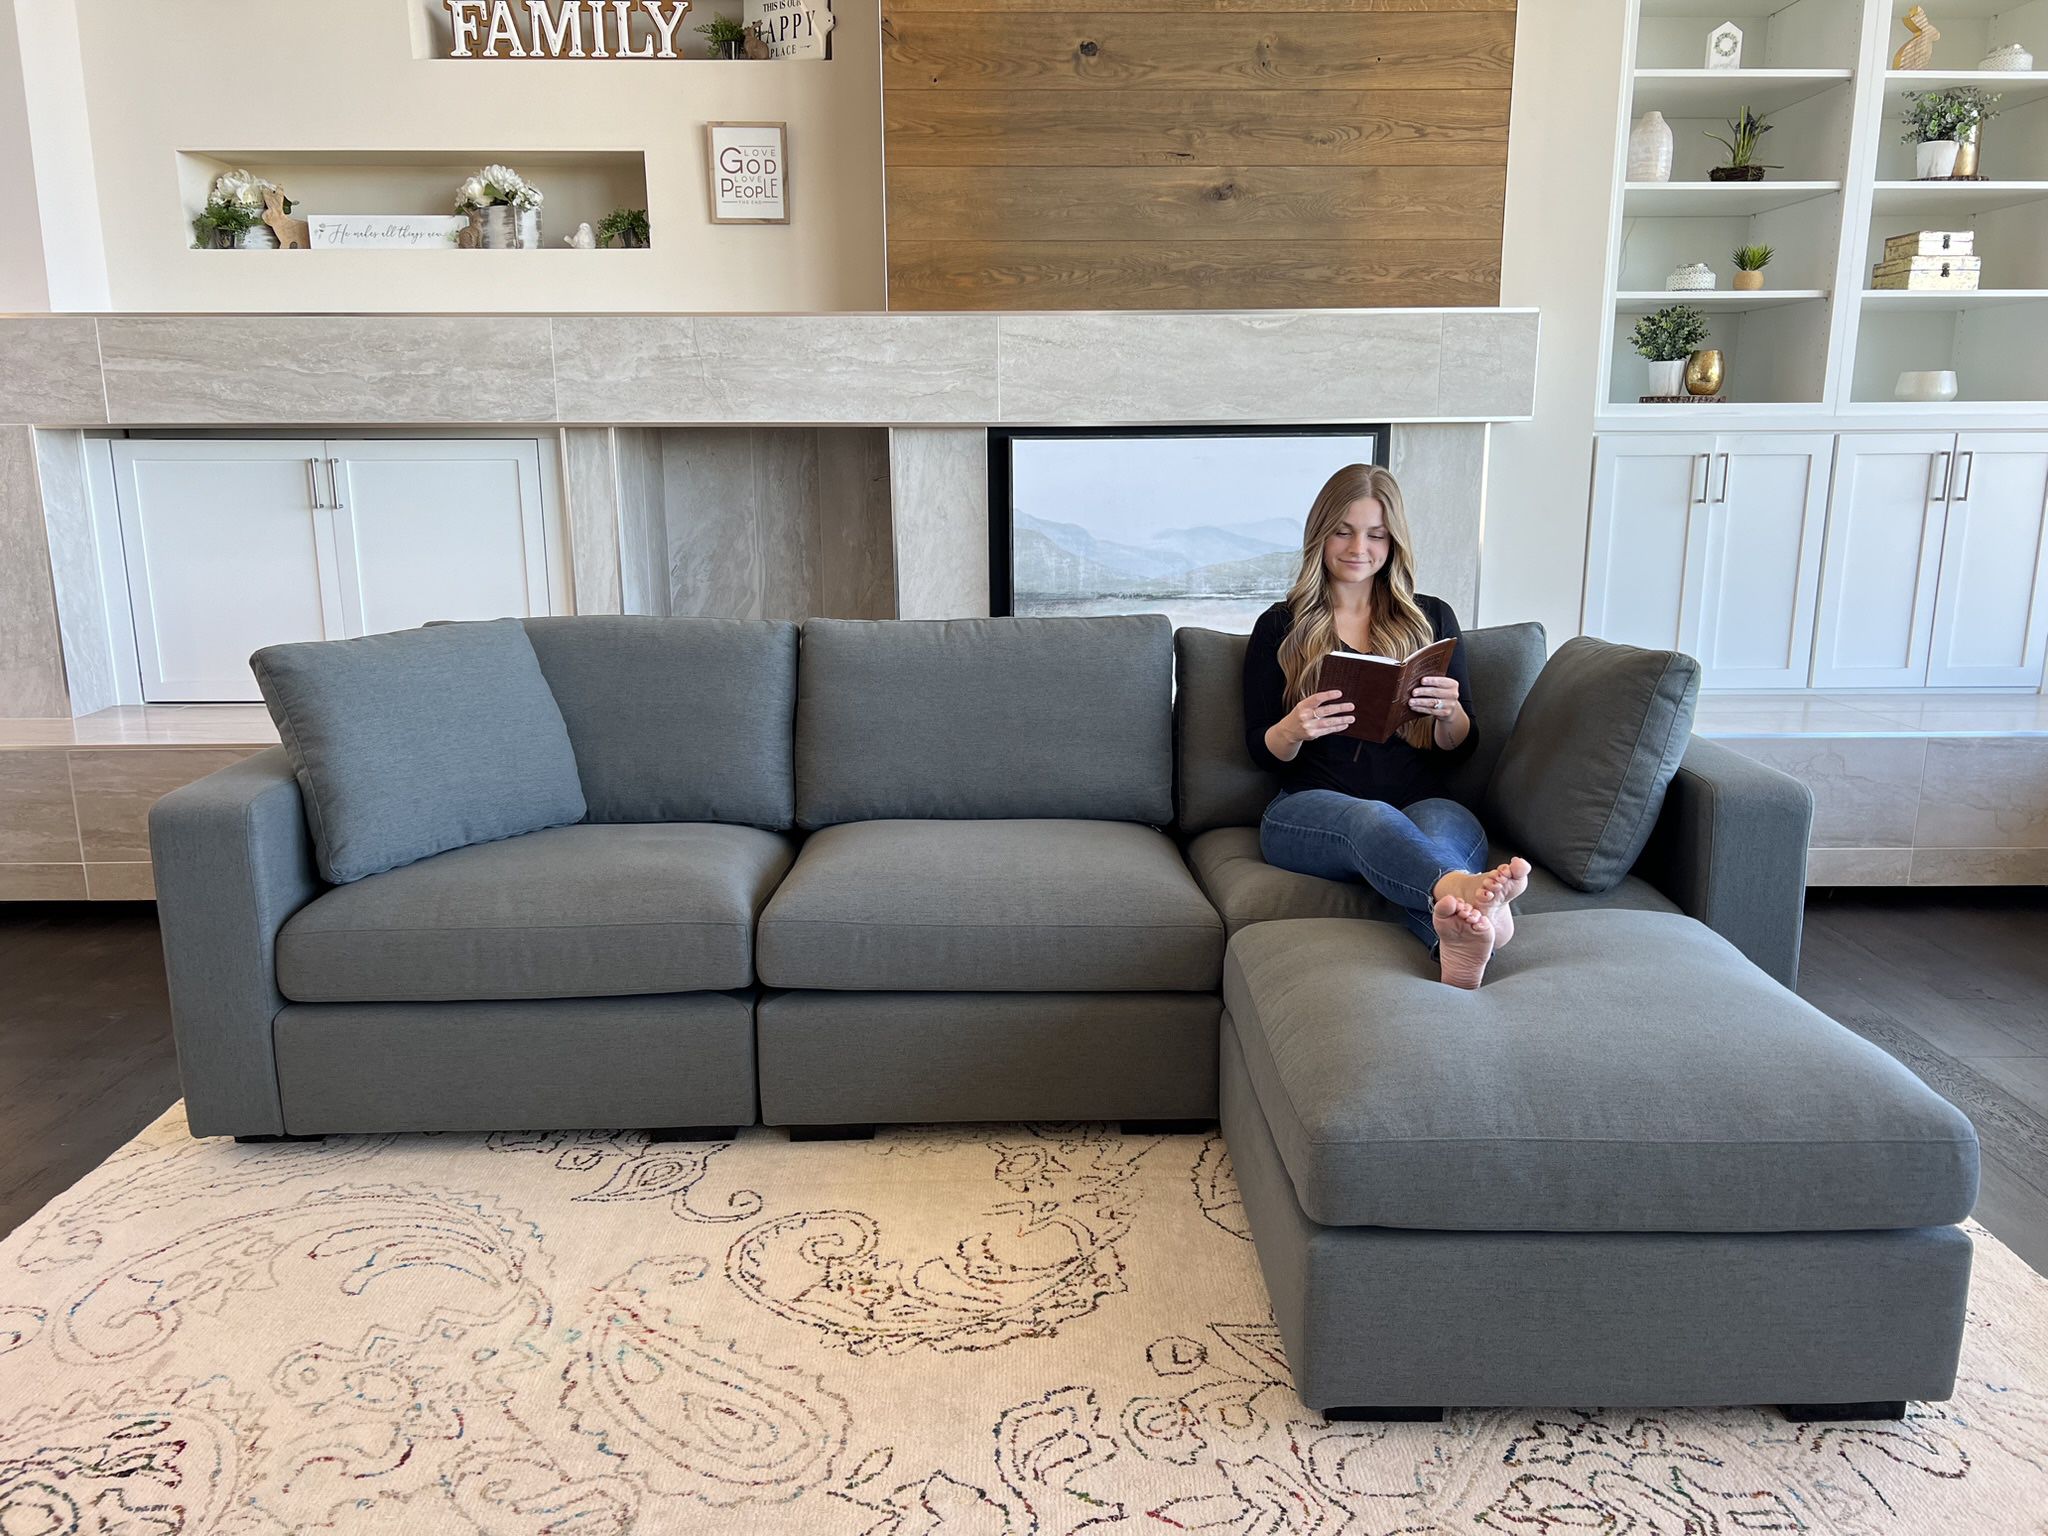 FREE DELIVERY✅Beautiful Modular Sectional Sofa Couch - BRAND NEW - 2 Colors!